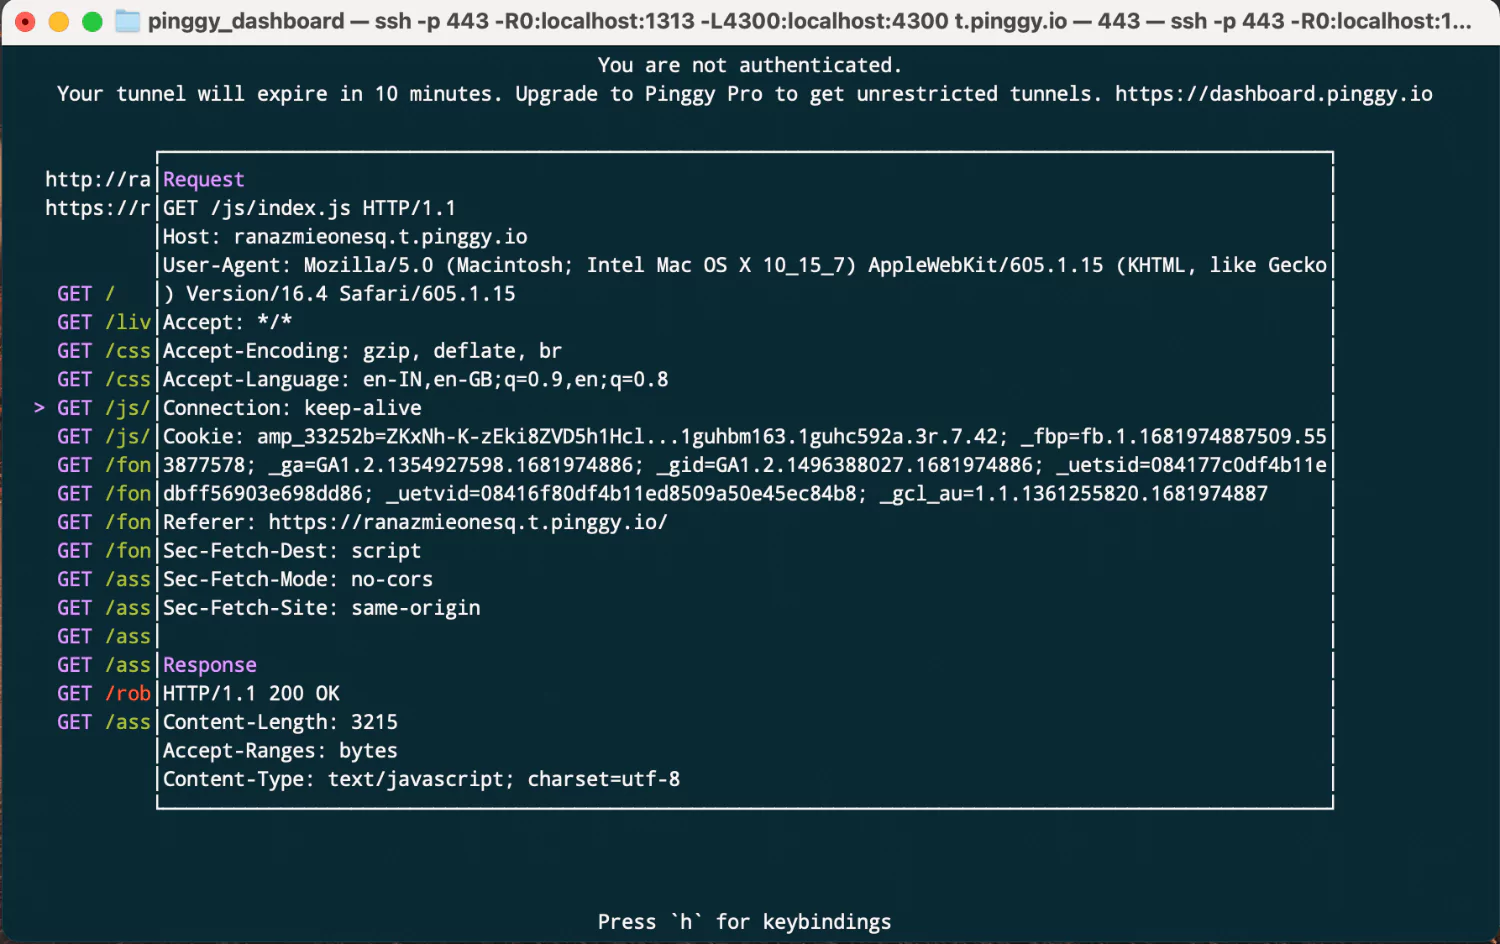 Pinggy terminal user interface (TUI) screenshot showing request and response headers of an HTTP request